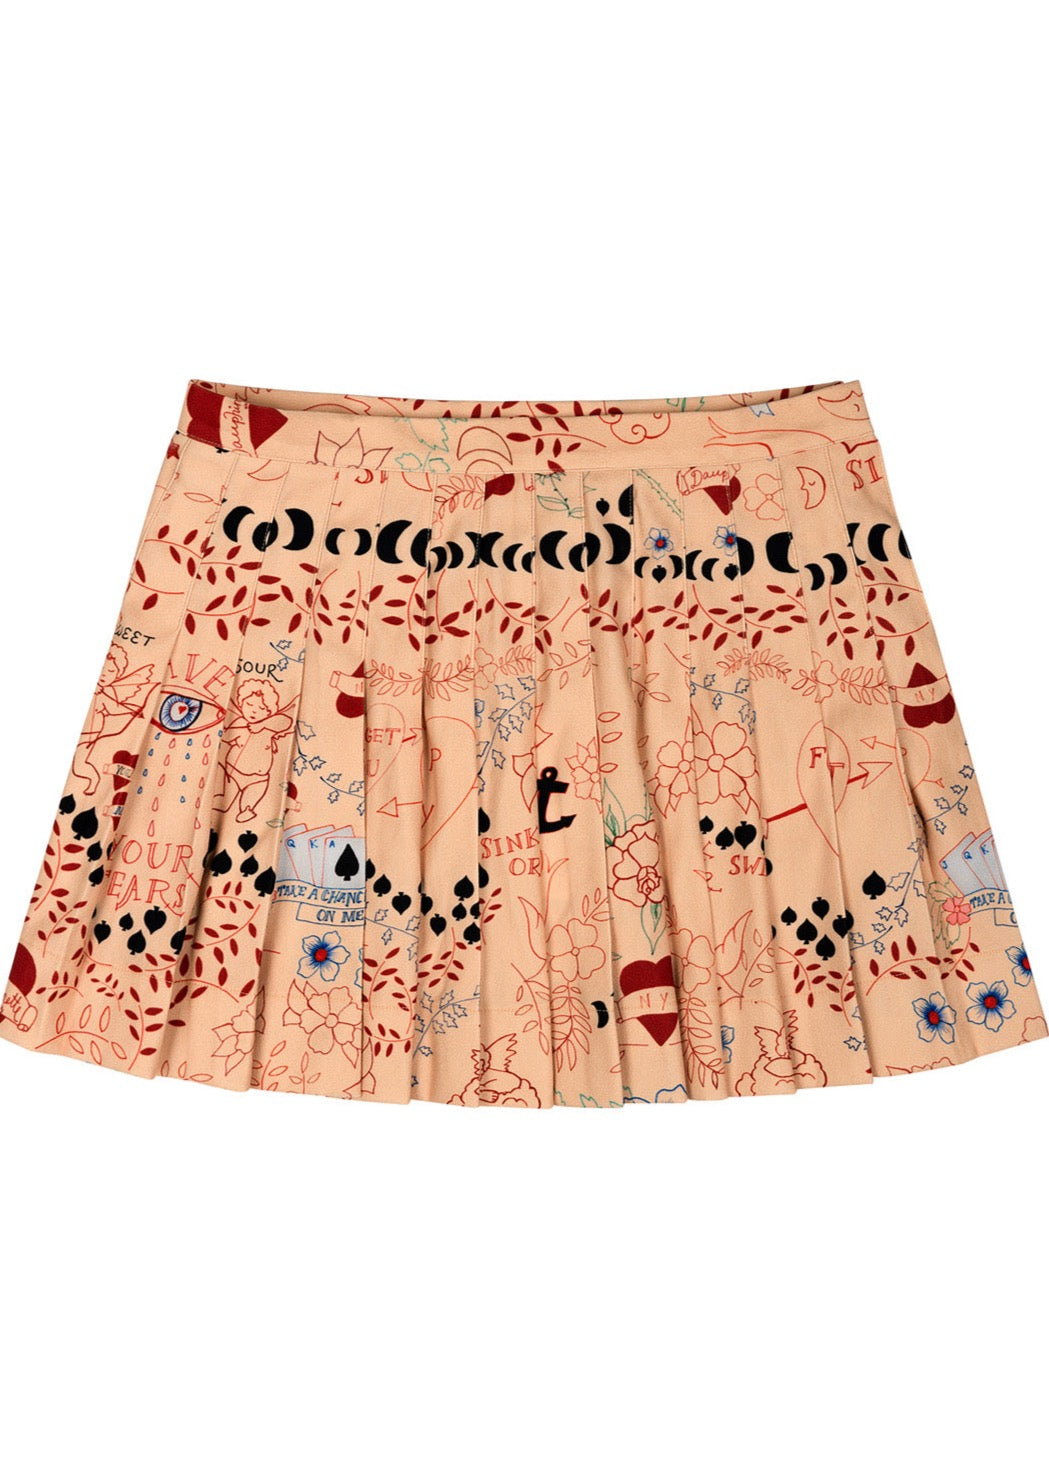 Pleated mini skirt in signature Tattoo You print, hand-illustrated by designer Olivia Cheng.